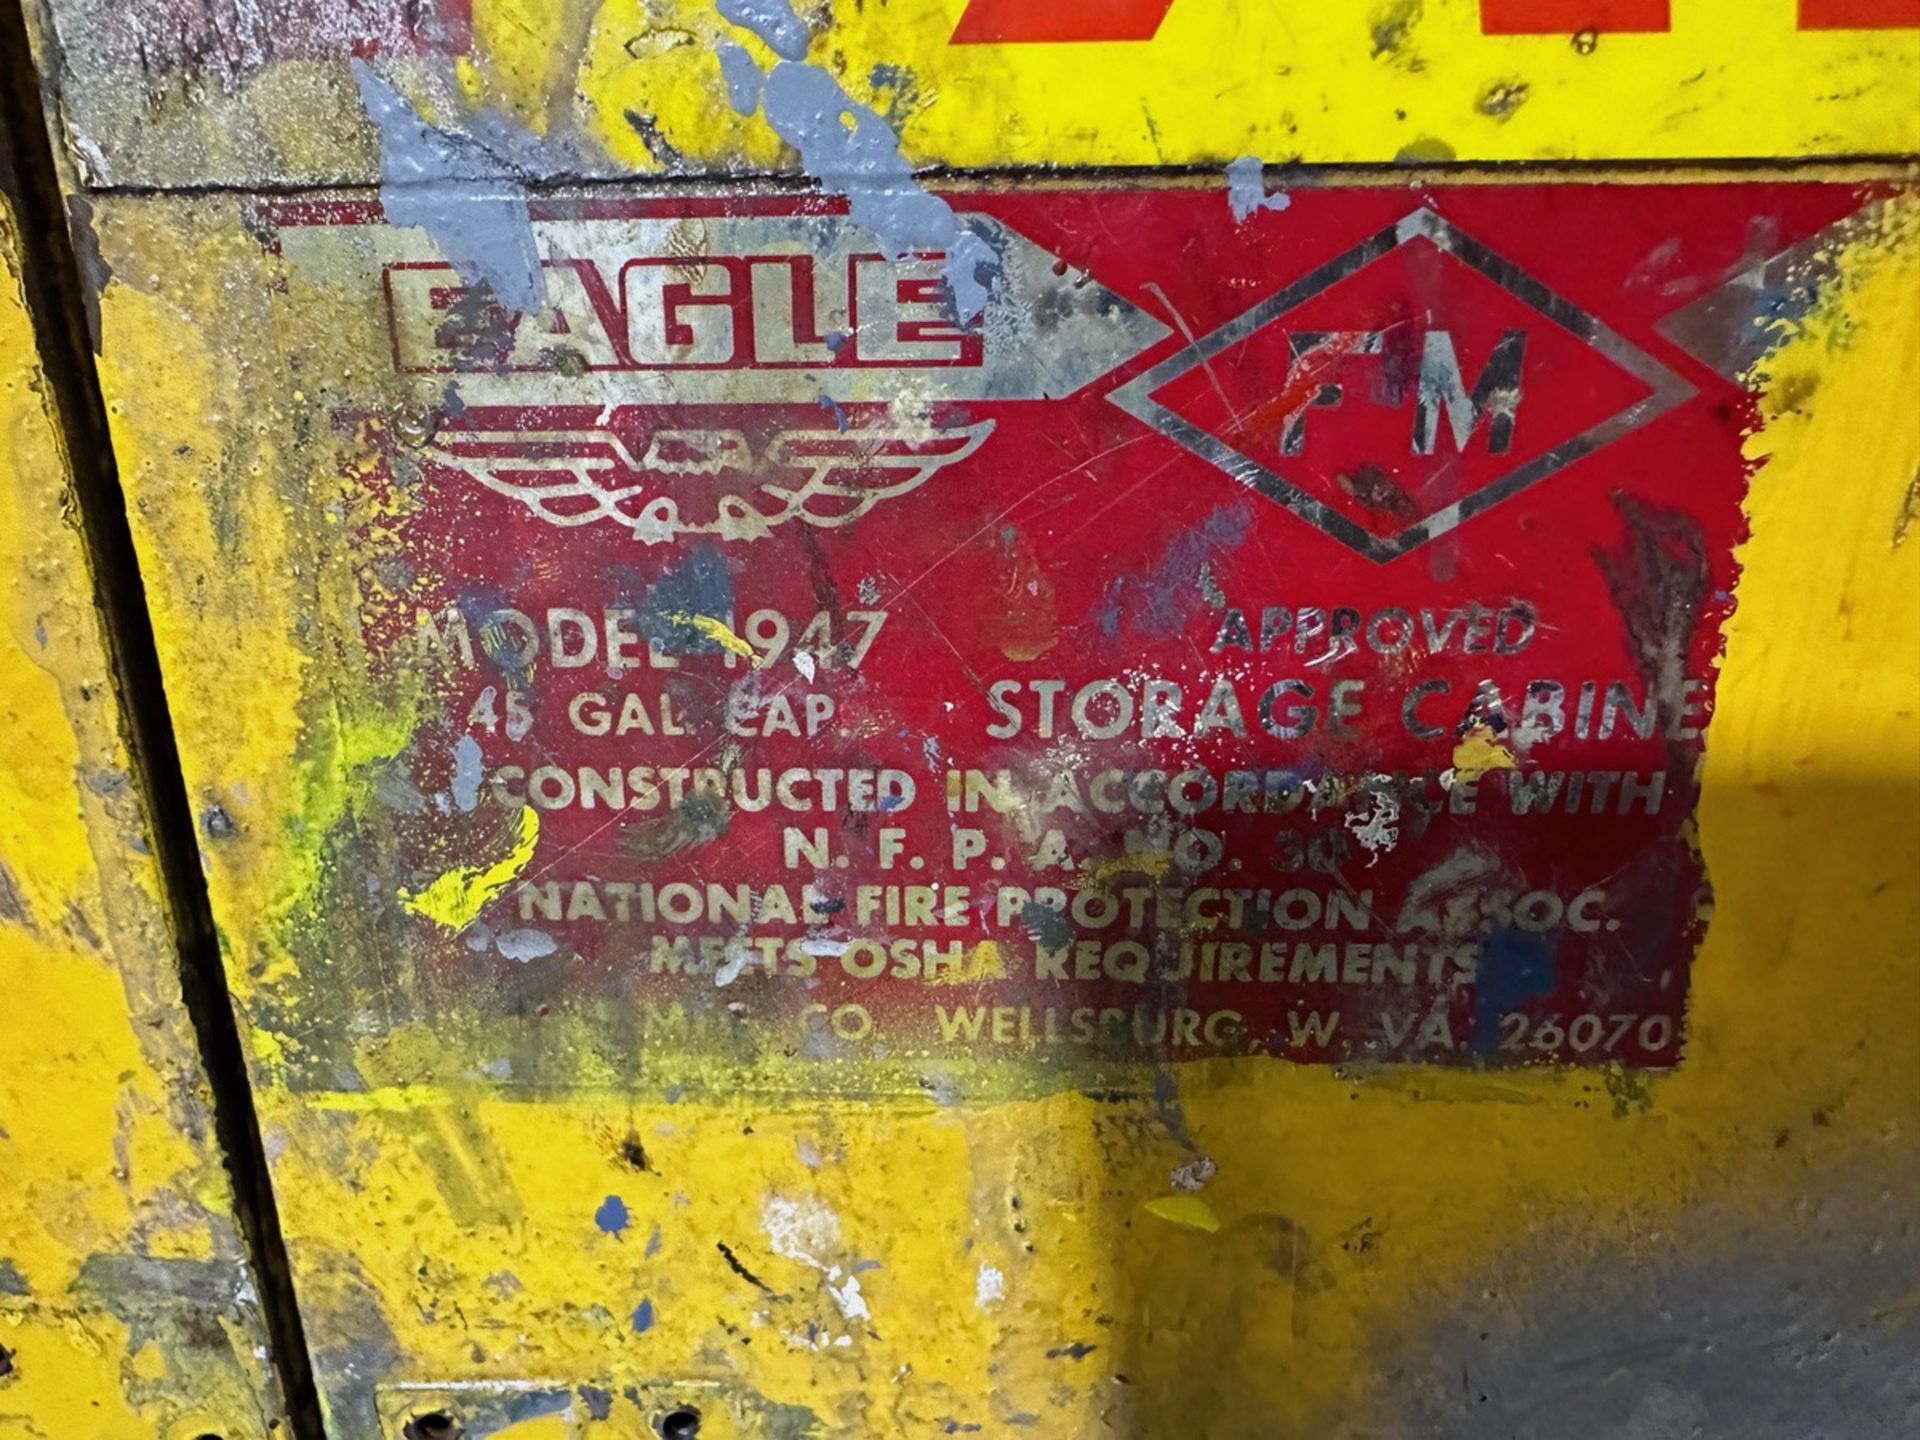 Eagle 45 Gallon Capacity Flammable Liquid Storage Cabinet (Approx. 43" x | Rig Fee $50 - Image 2 of 2